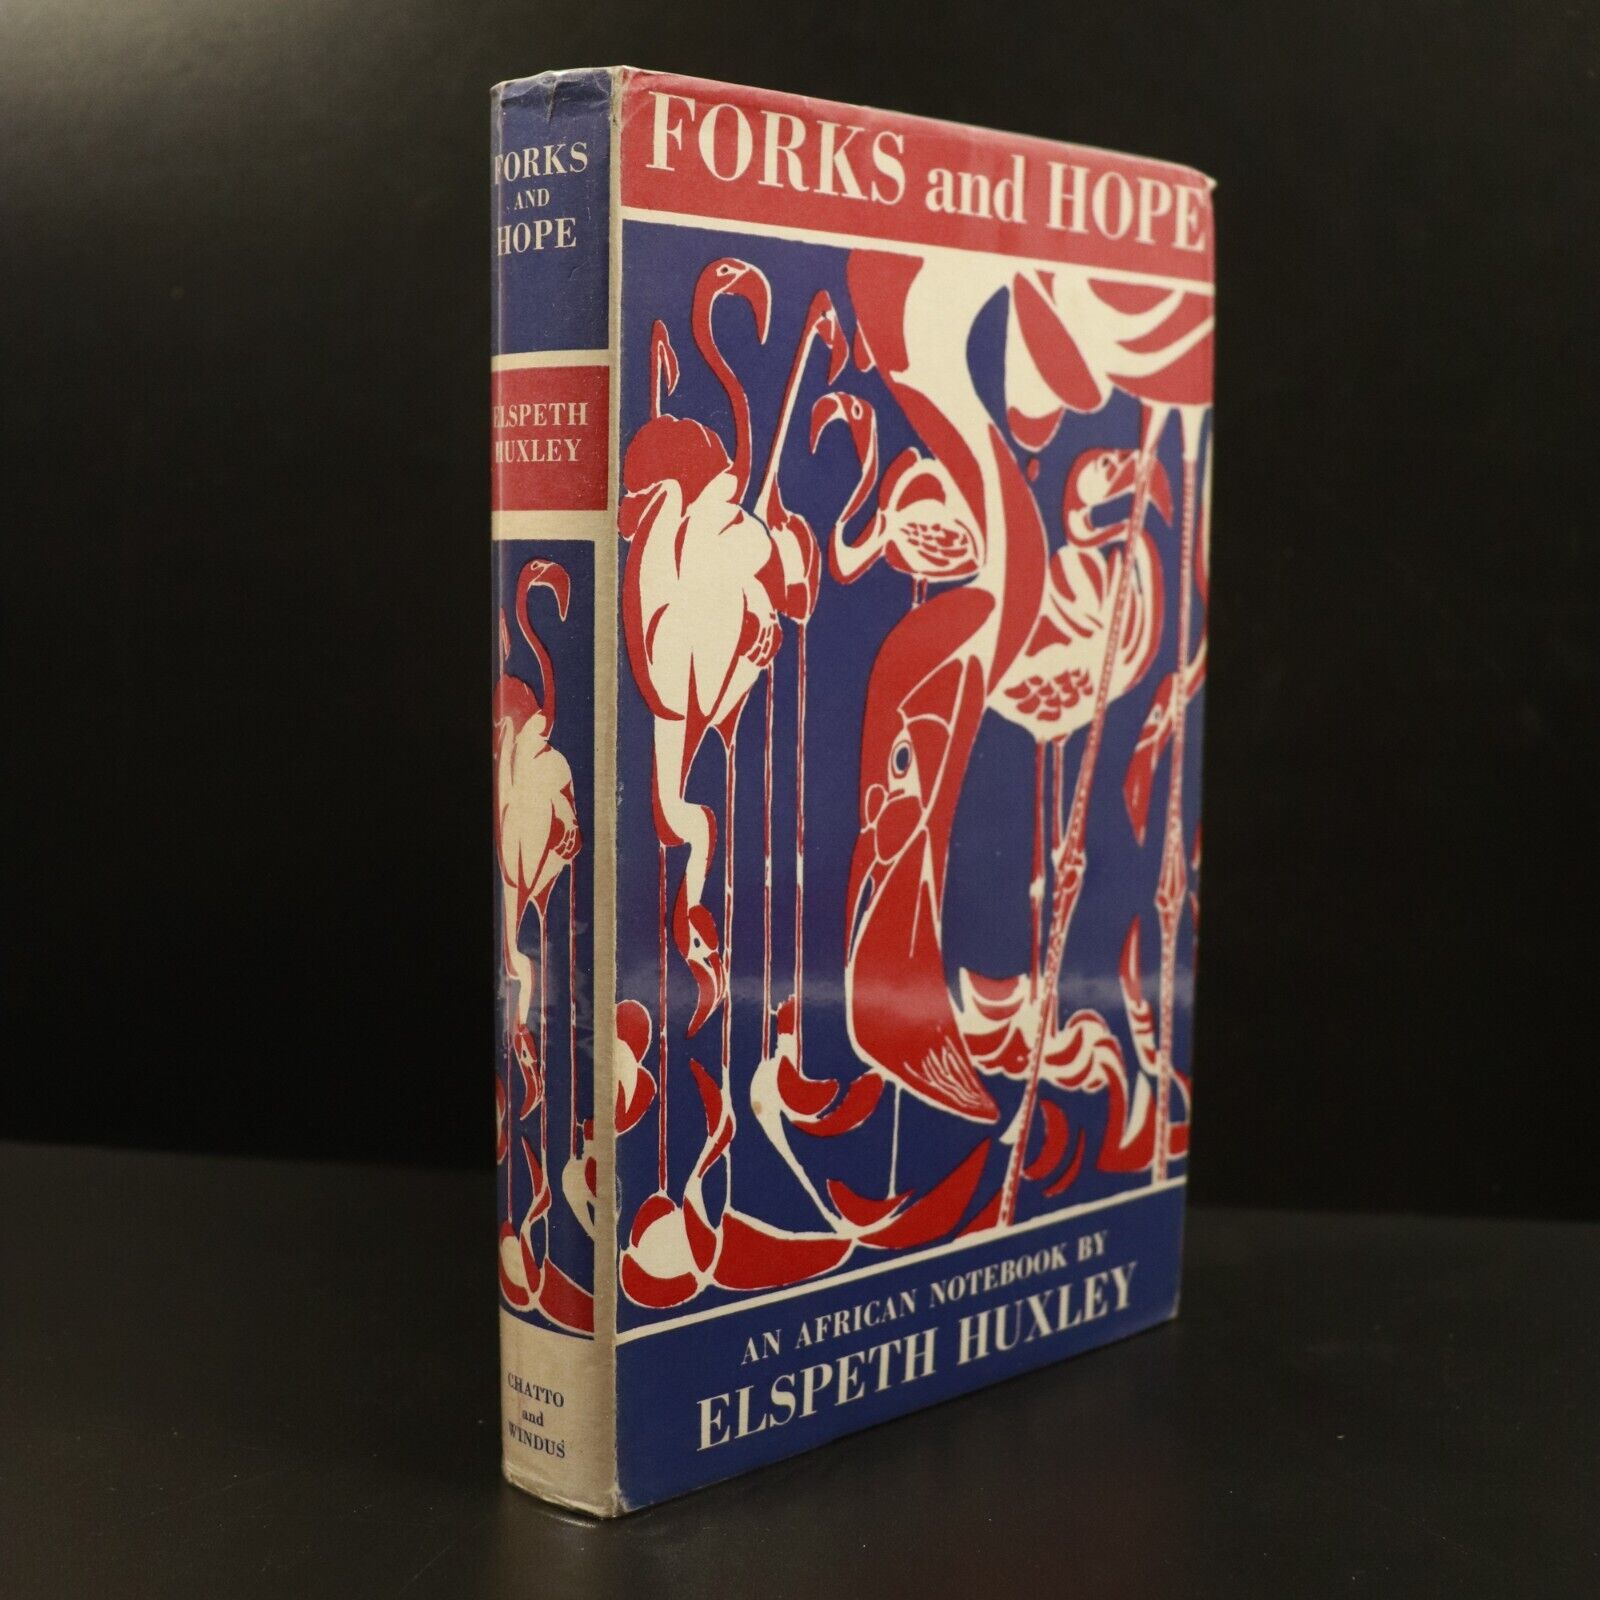 1964 Forks & Hope An African Notebook by Elspeth Huxley African History Book